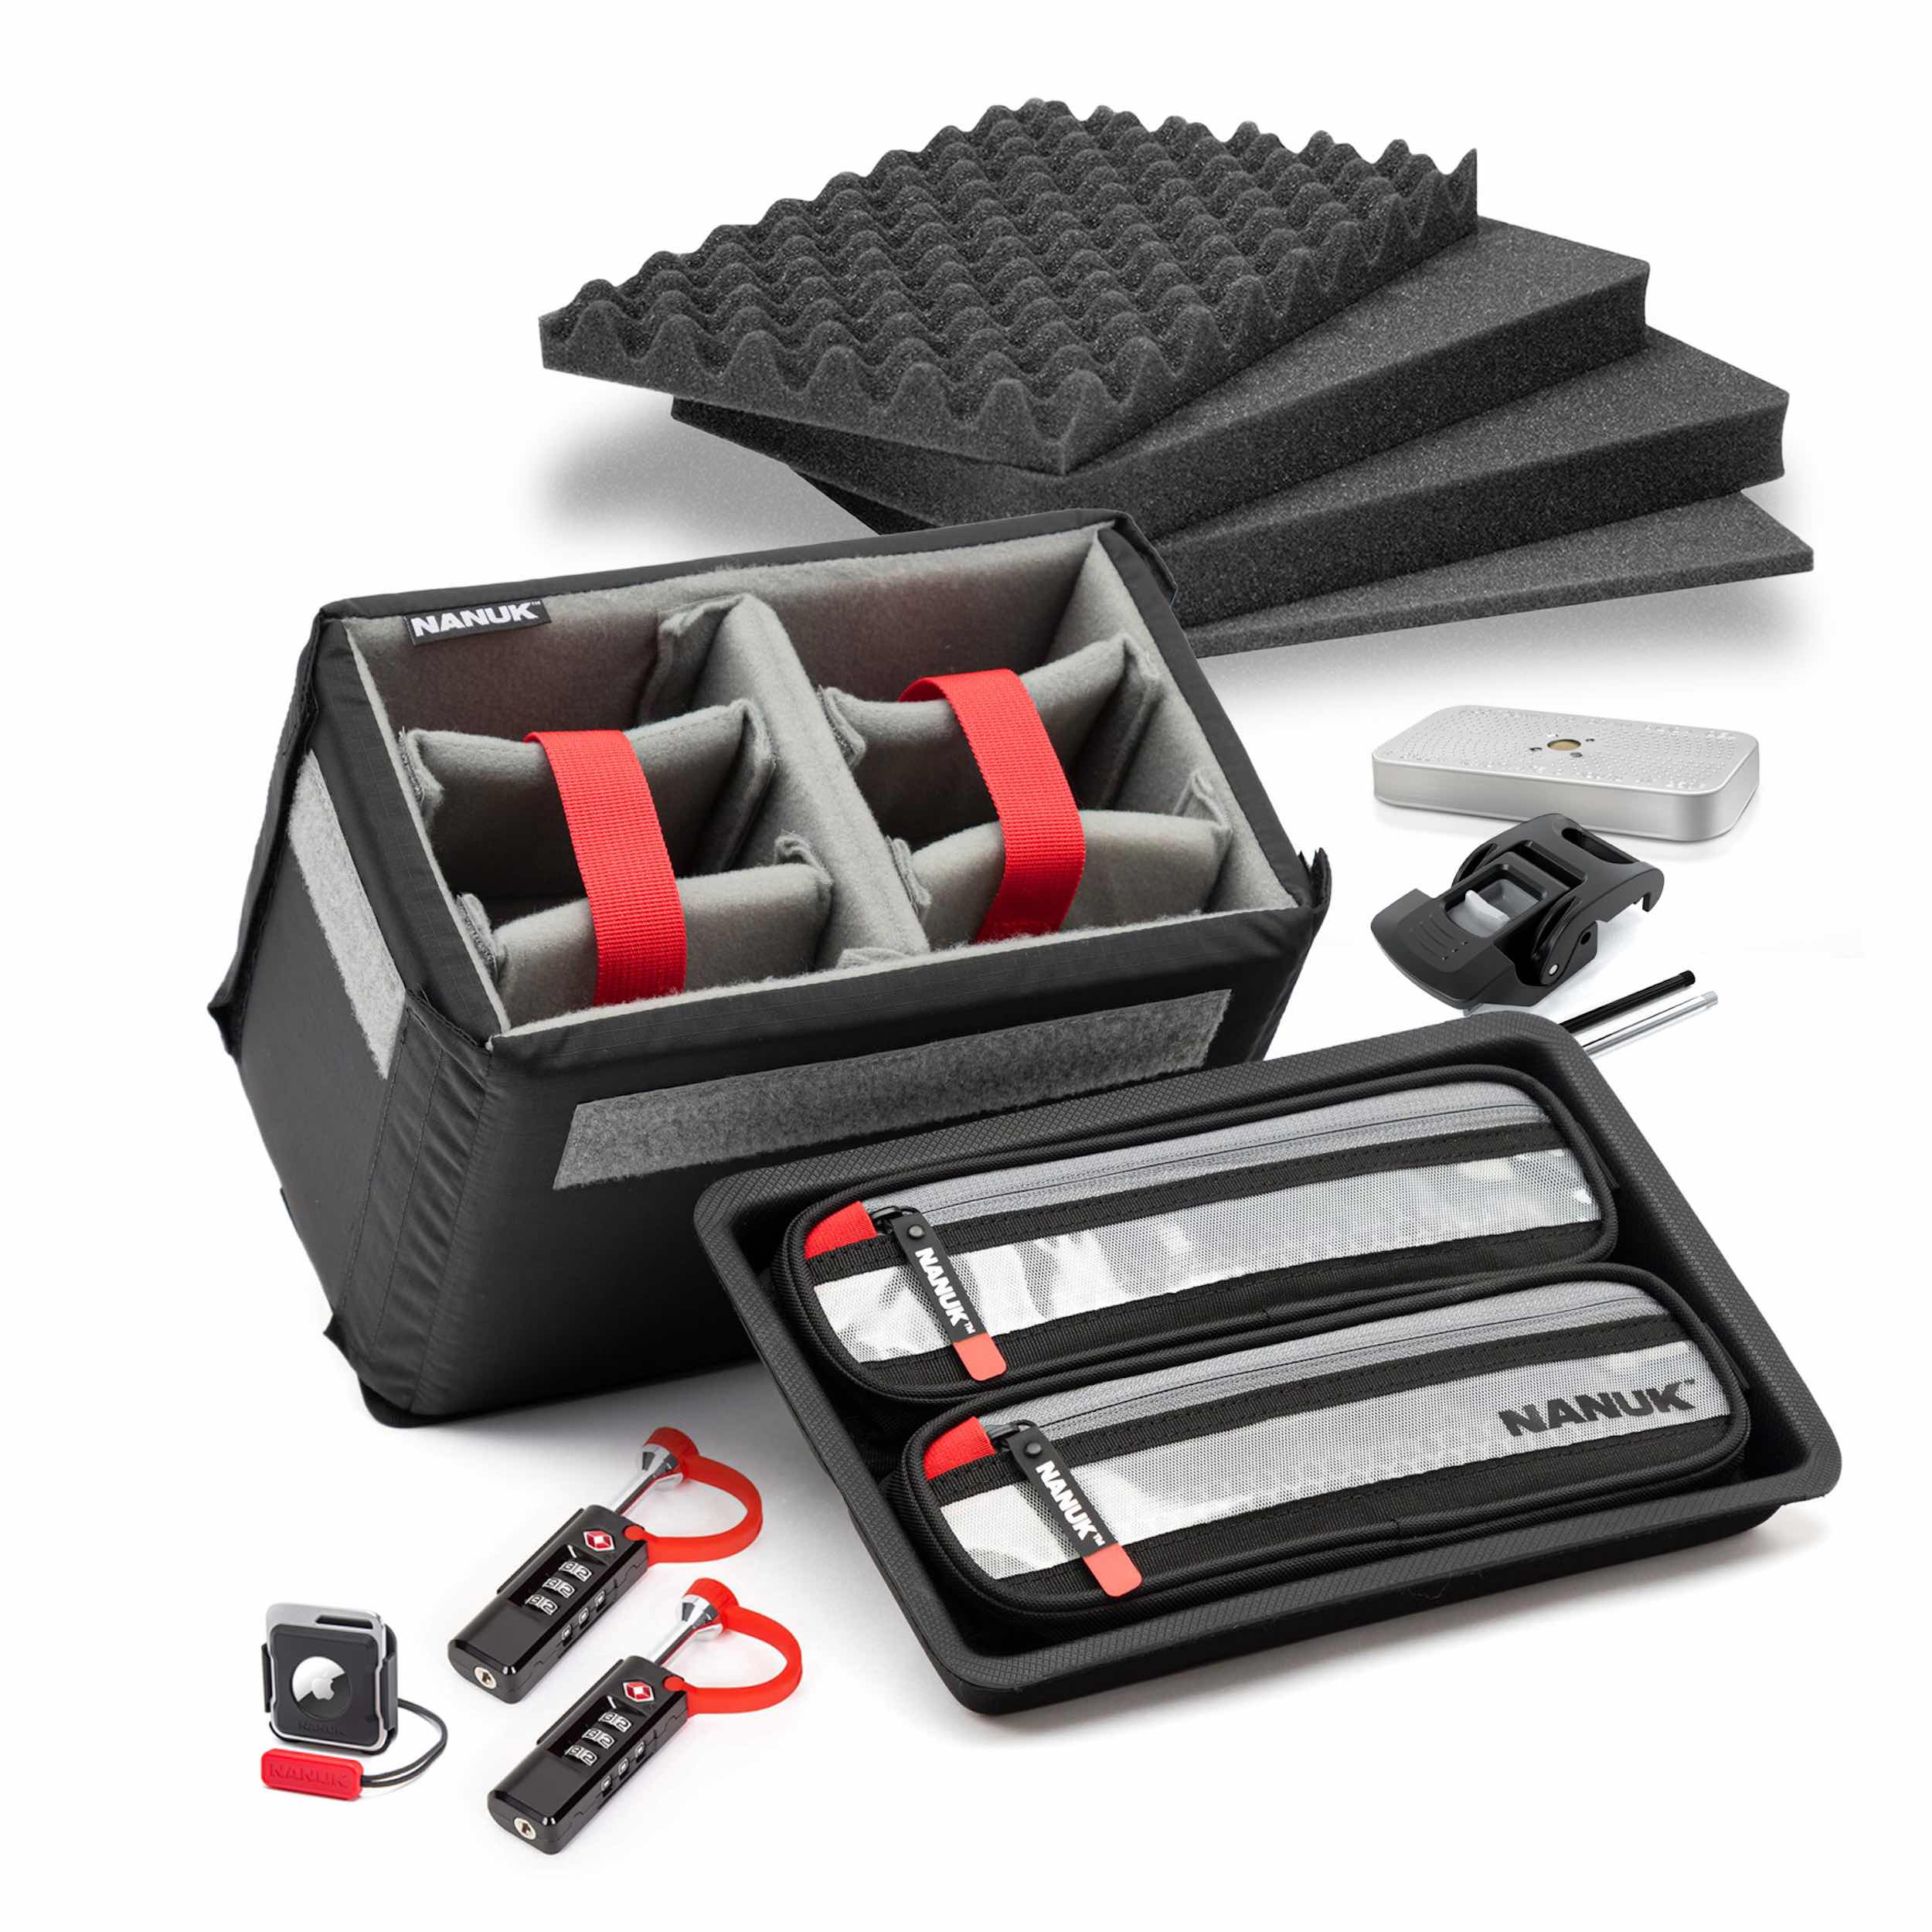 NANUK case accessories including foam inserts, padded dividers, locks, and utility pouches for customized gear protection